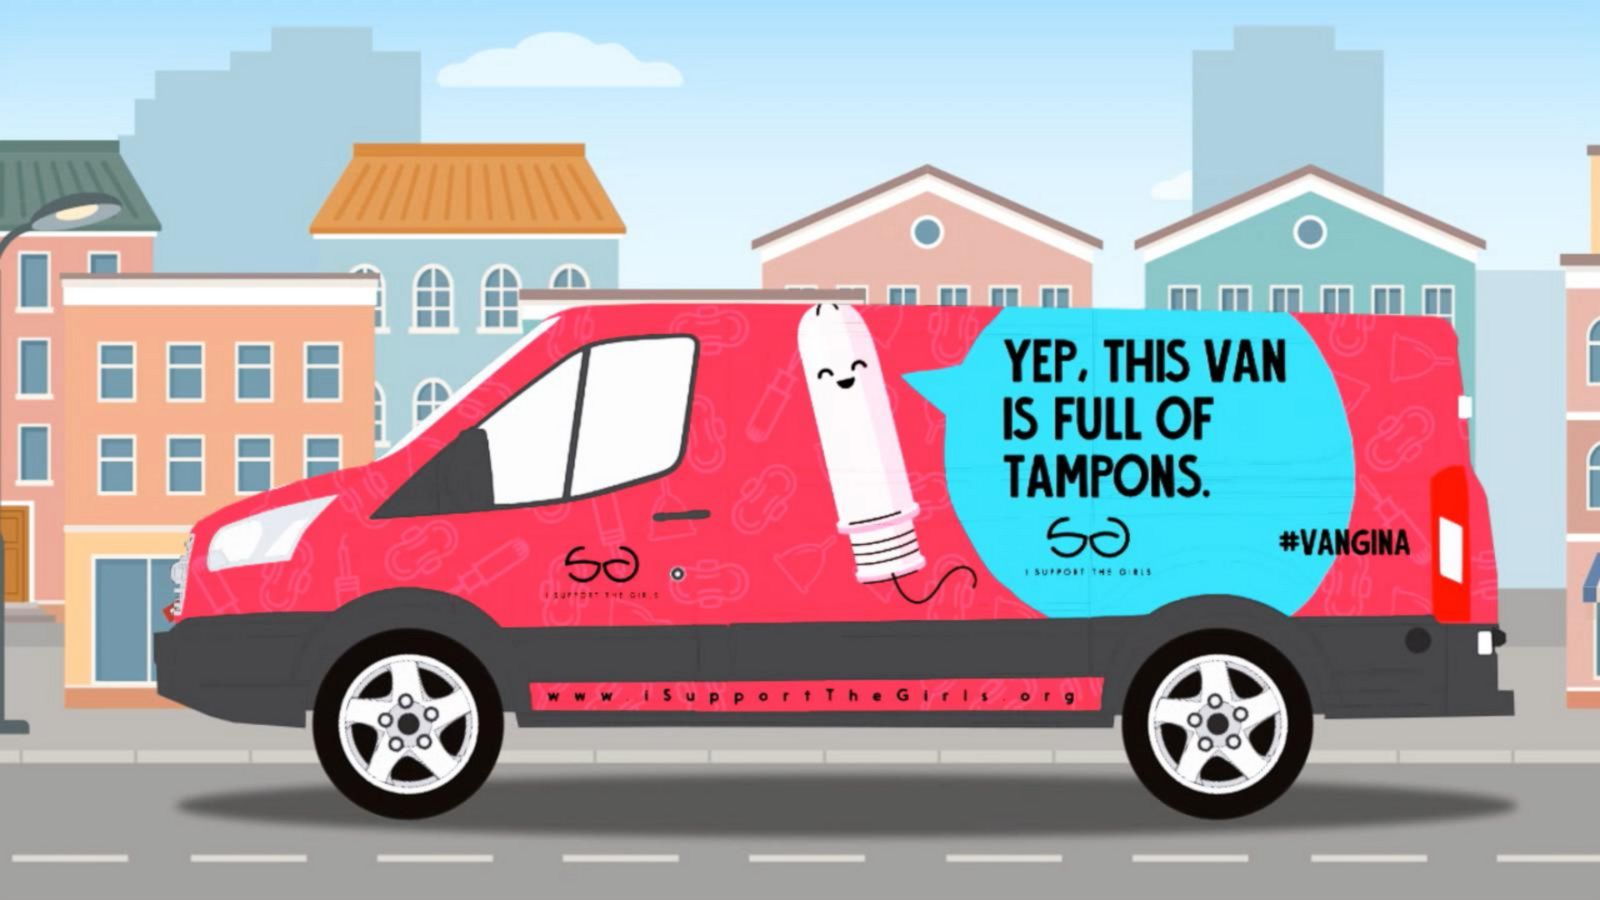 Organization donates feminine products across the country in a pink van ...